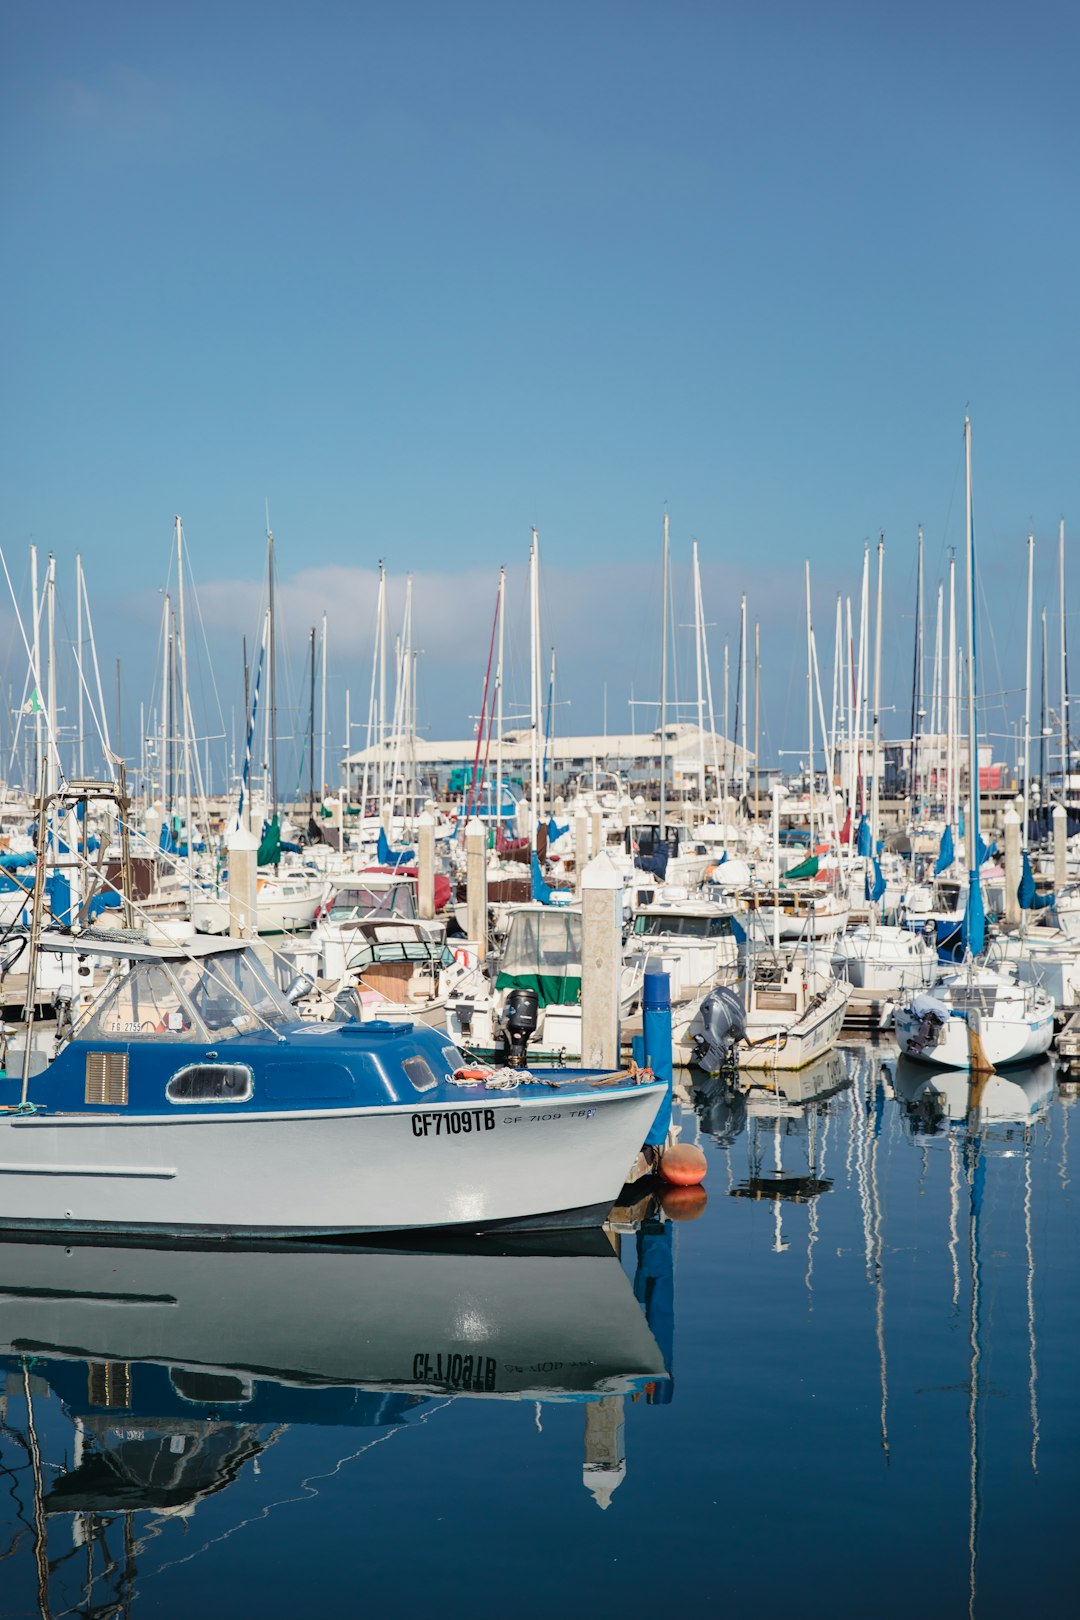 assorted boats on body of water during daytime